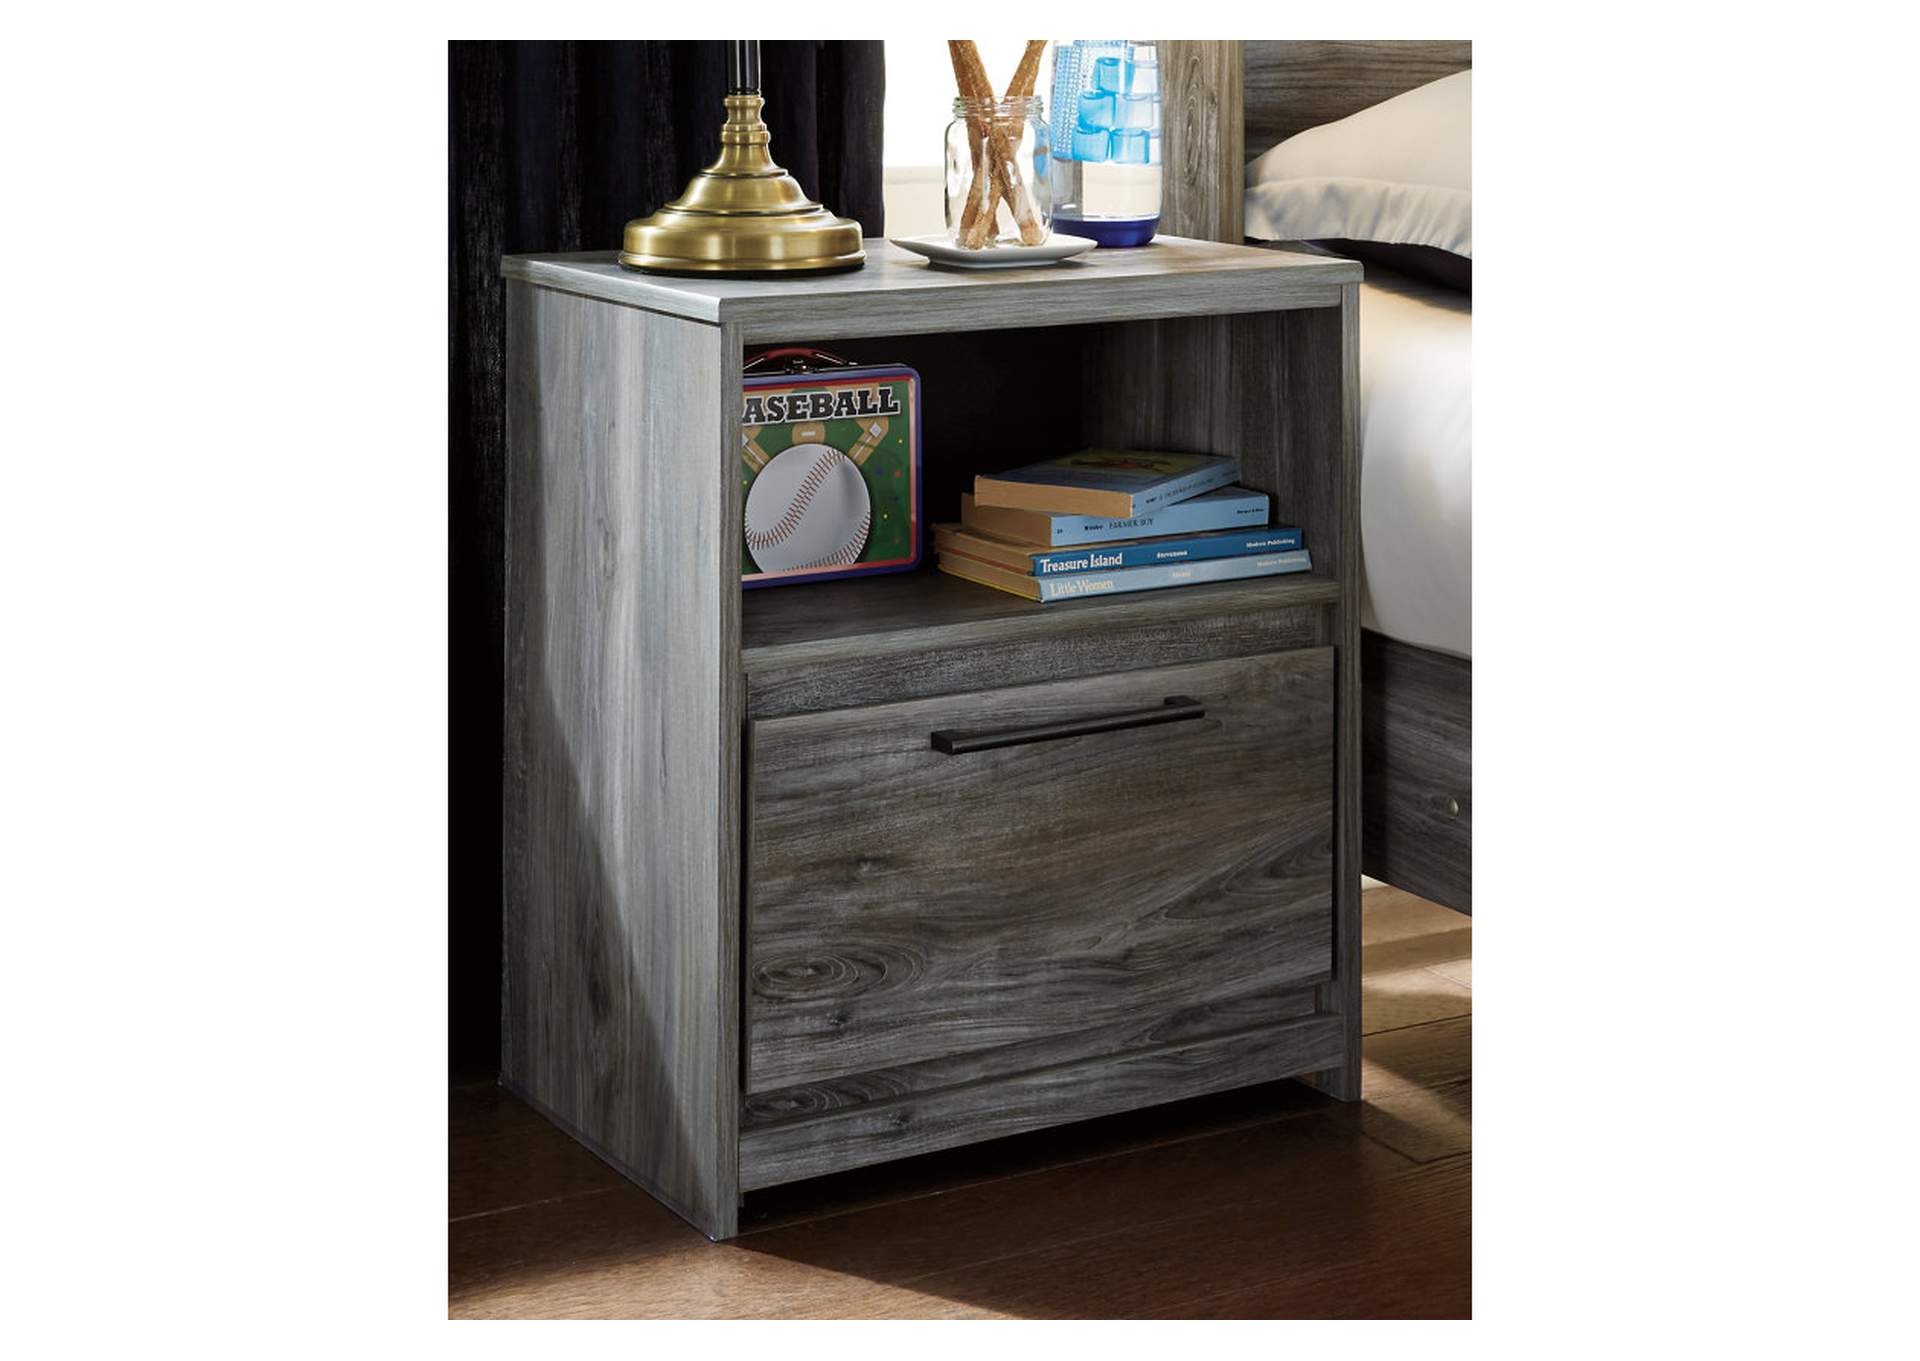 Baystorm Queen Panel Bed, Dresser, Mirror and Nightstand,Signature Design By Ashley